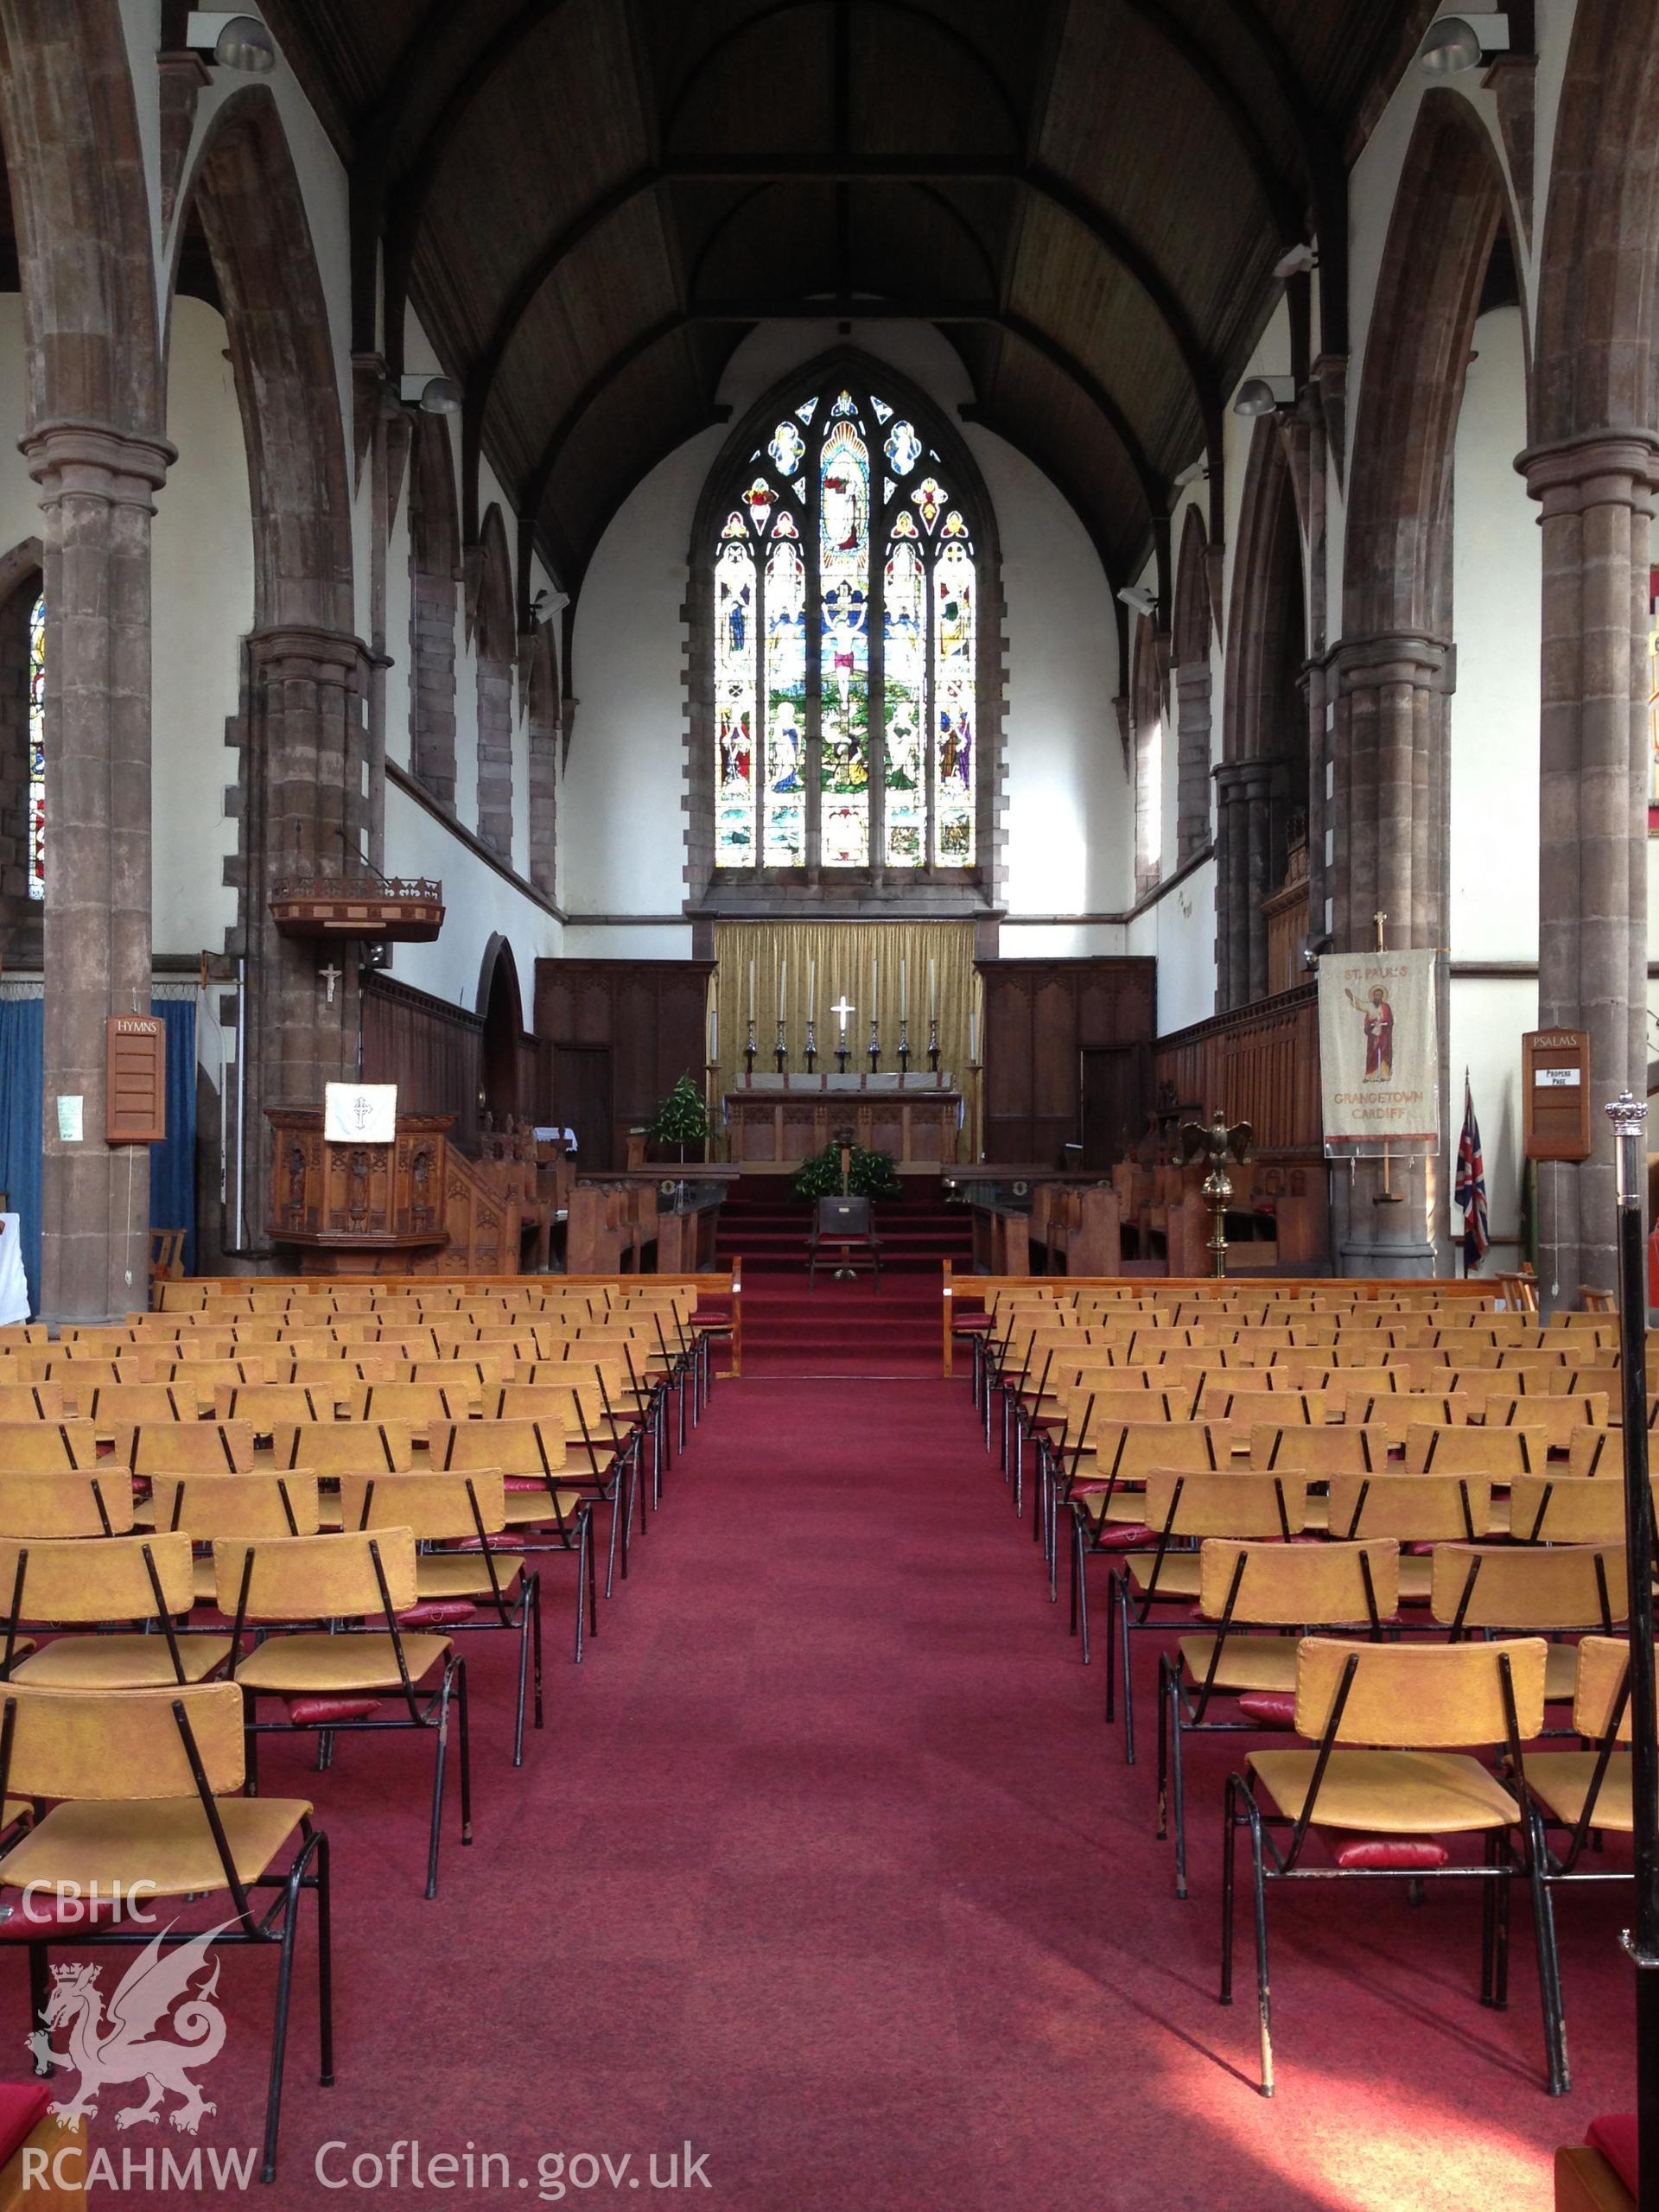 Colour photo showing view from the nave to the chancel at St Paul's Church, Grangetown, taken by Revd David T. Morris, 2018.